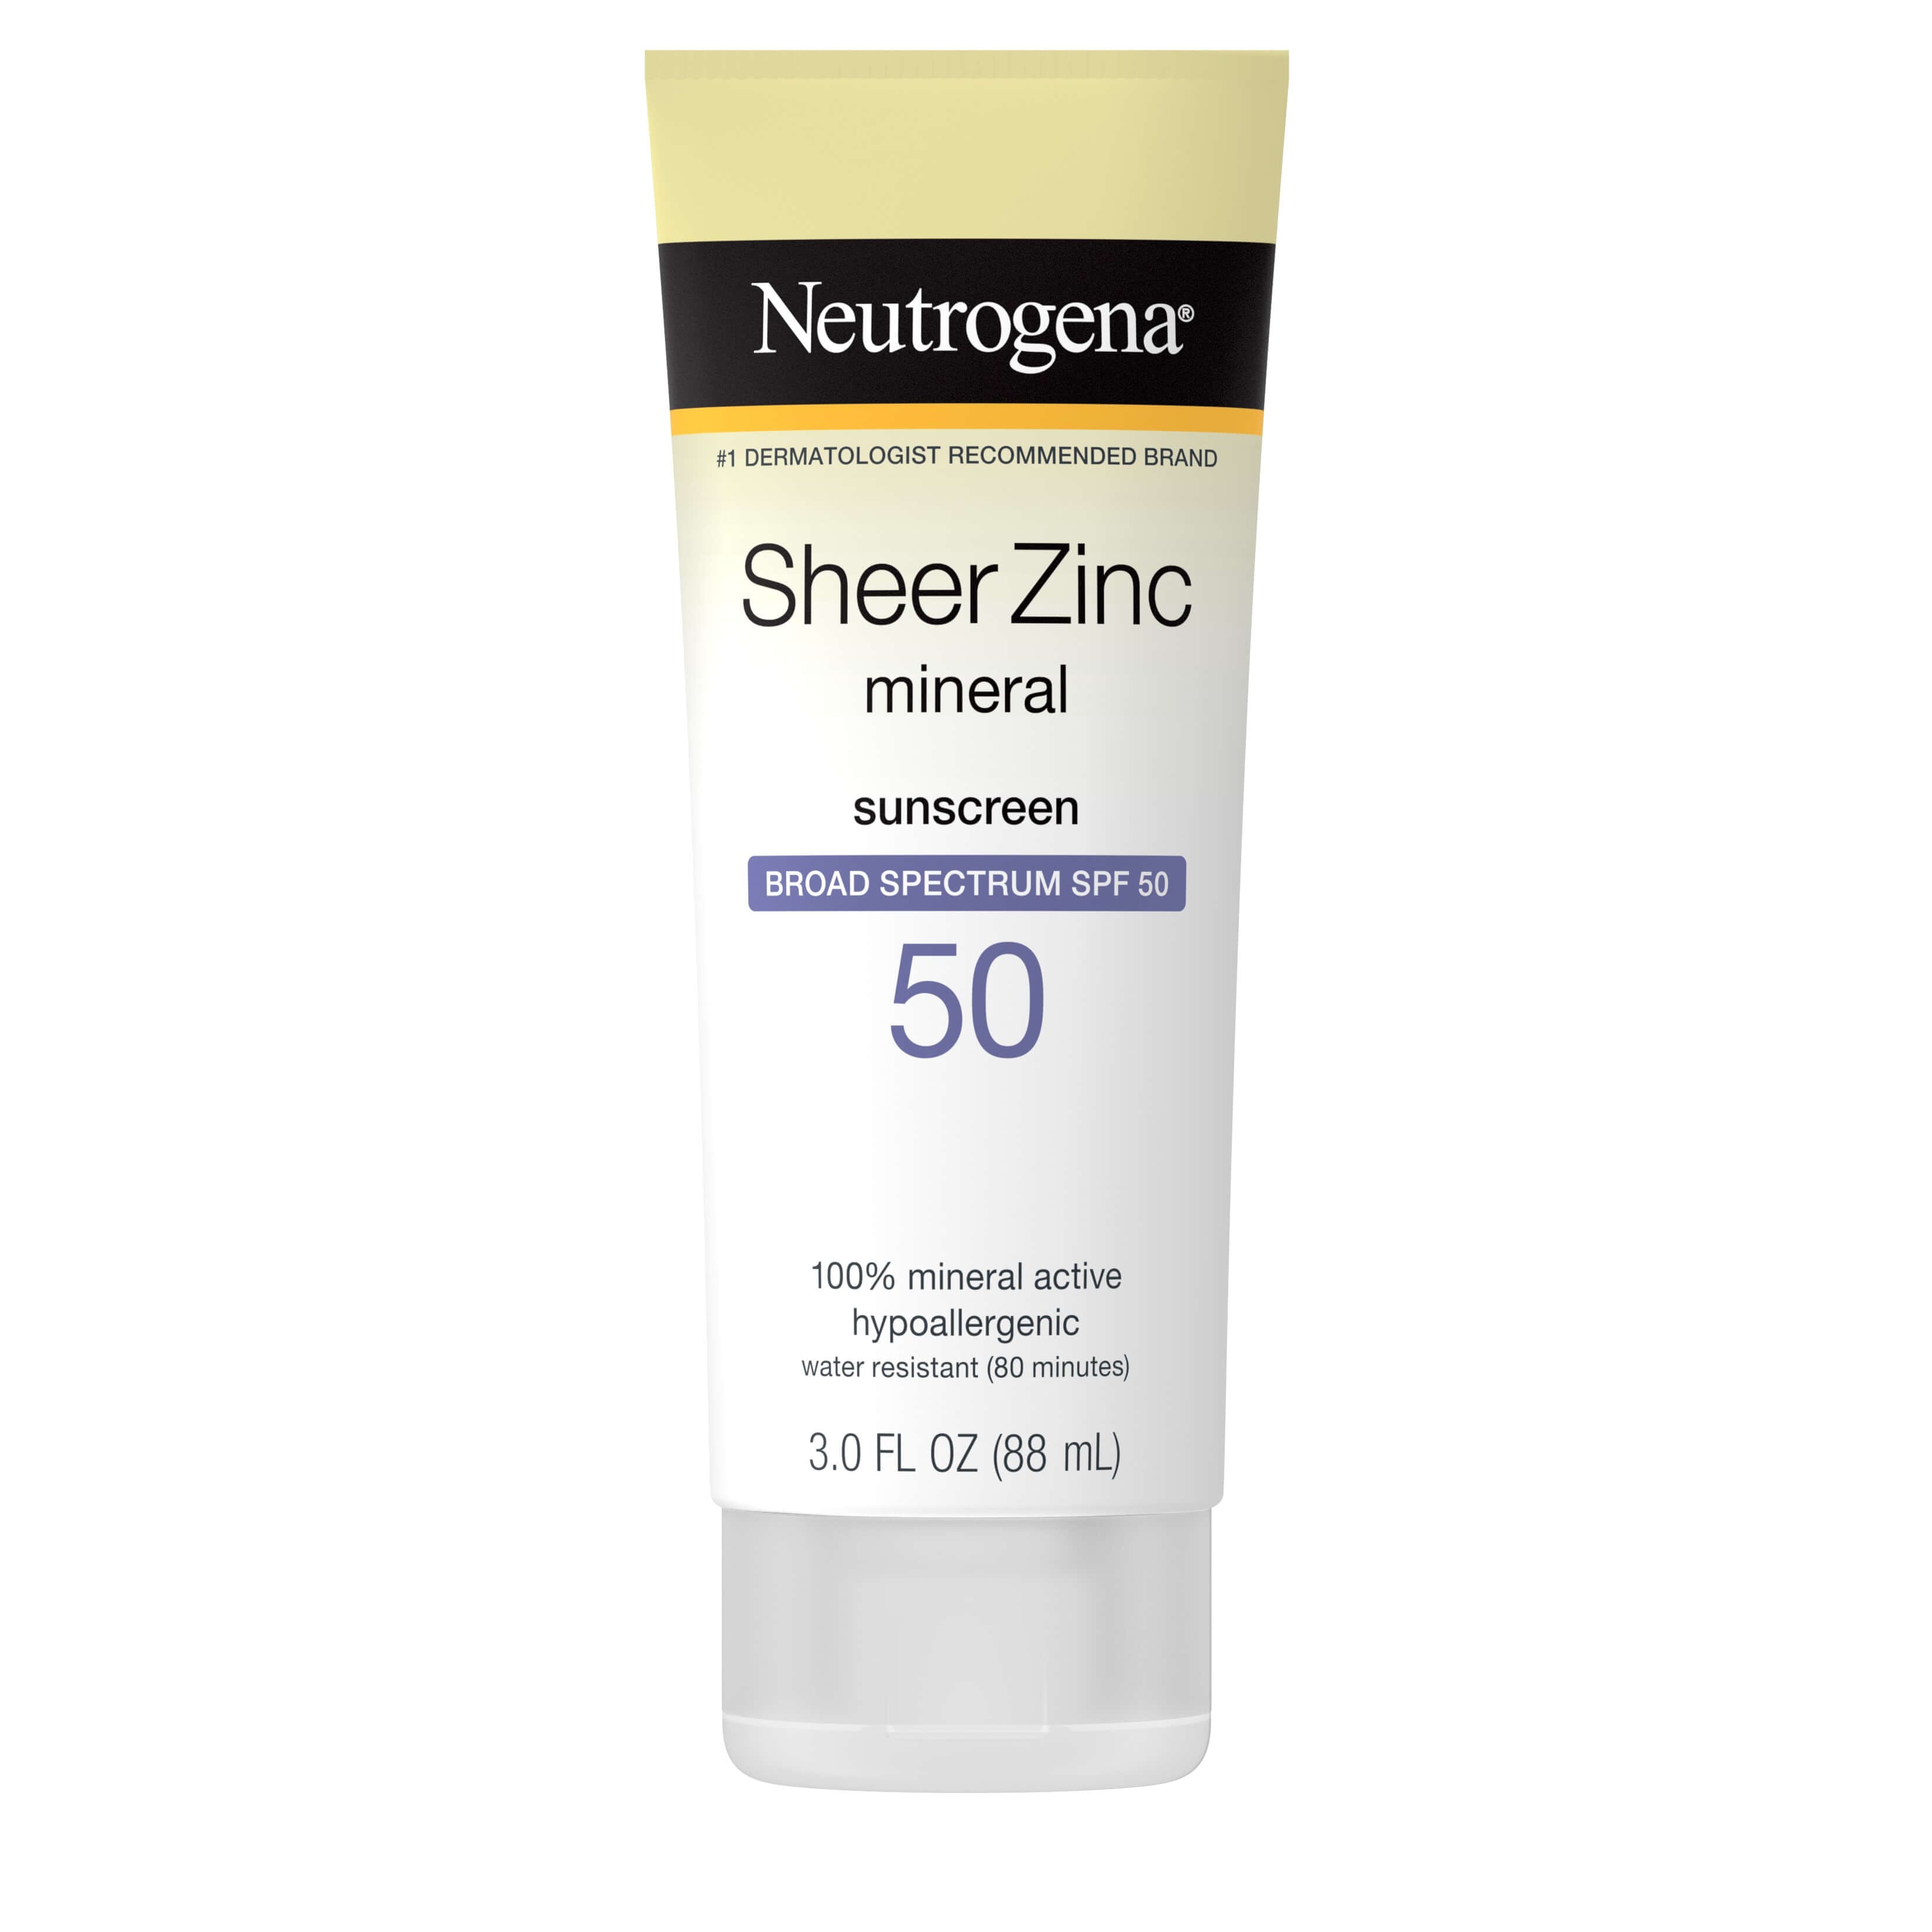 Neutrogena Sheer Zinc Oxide Dry-Touch Face Sunscreen with Broad Spectrum SPF 50, Oil-Free, Non-Comedogenic & Non-Greasy Mineral Sunscreen, 2 fl. oz 2 Fl Oz (Pack of 1)